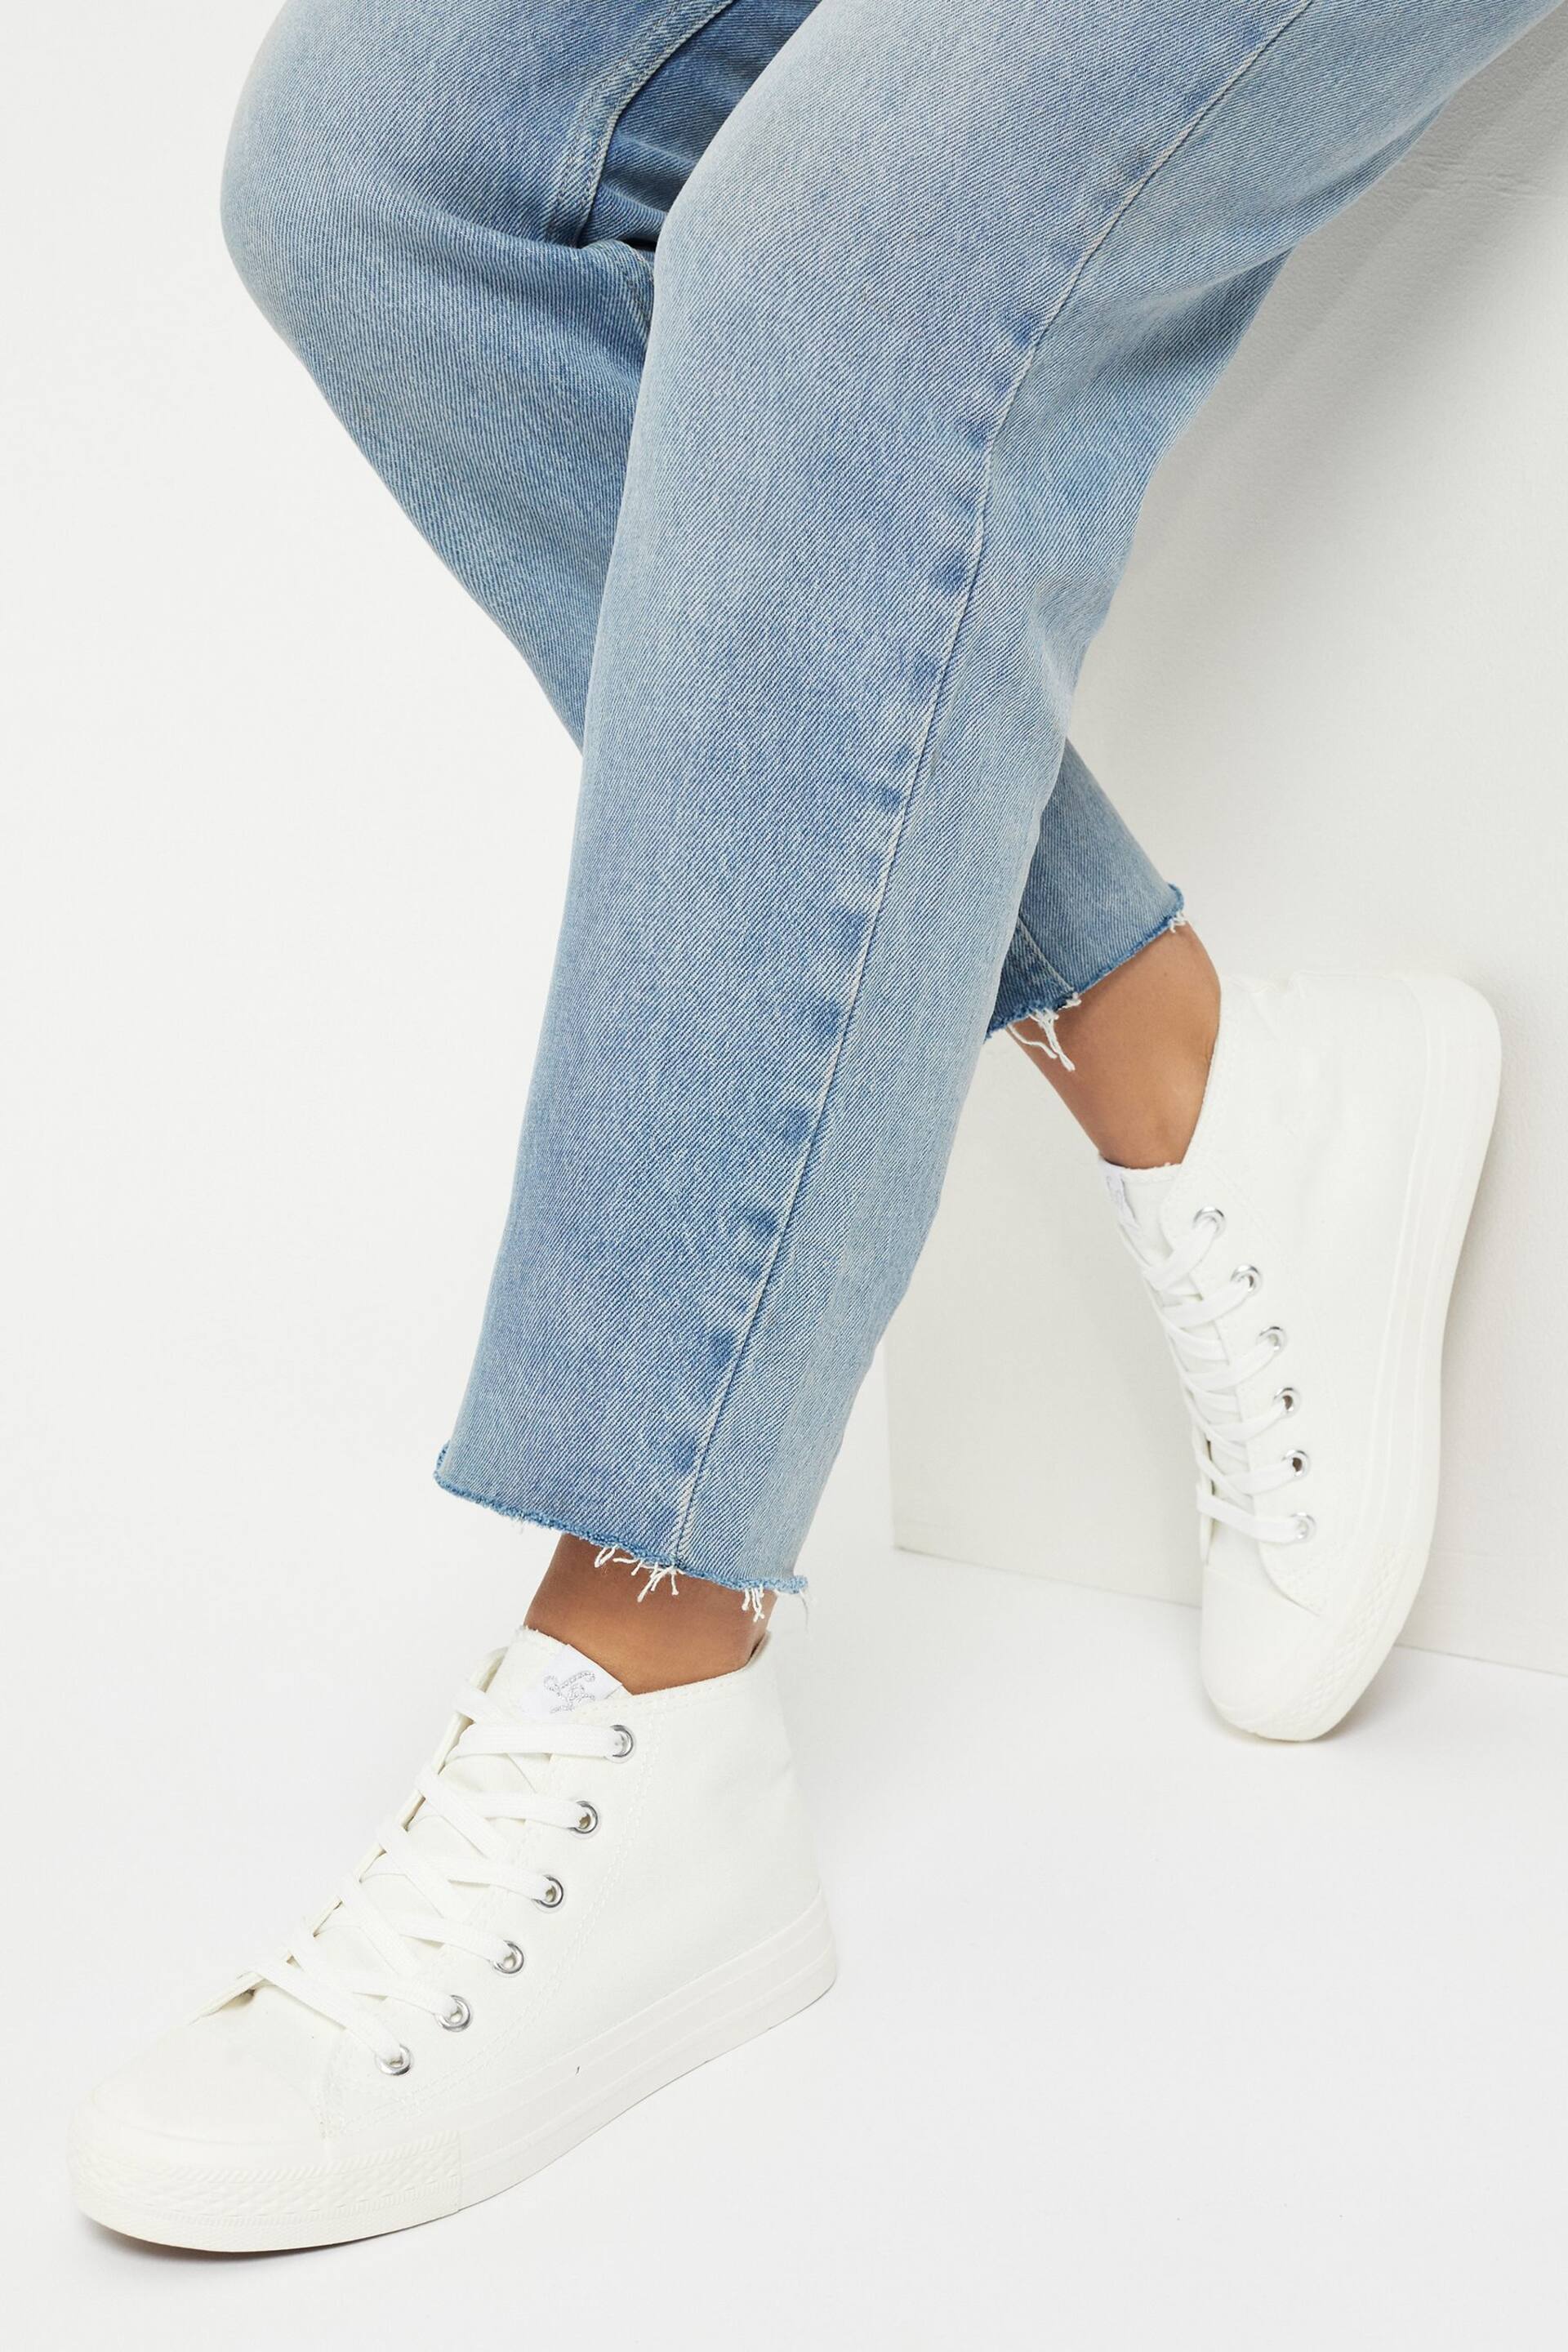 Lipsy White Flat High Top Lace Up Flatform Trainer - Image 1 of 1